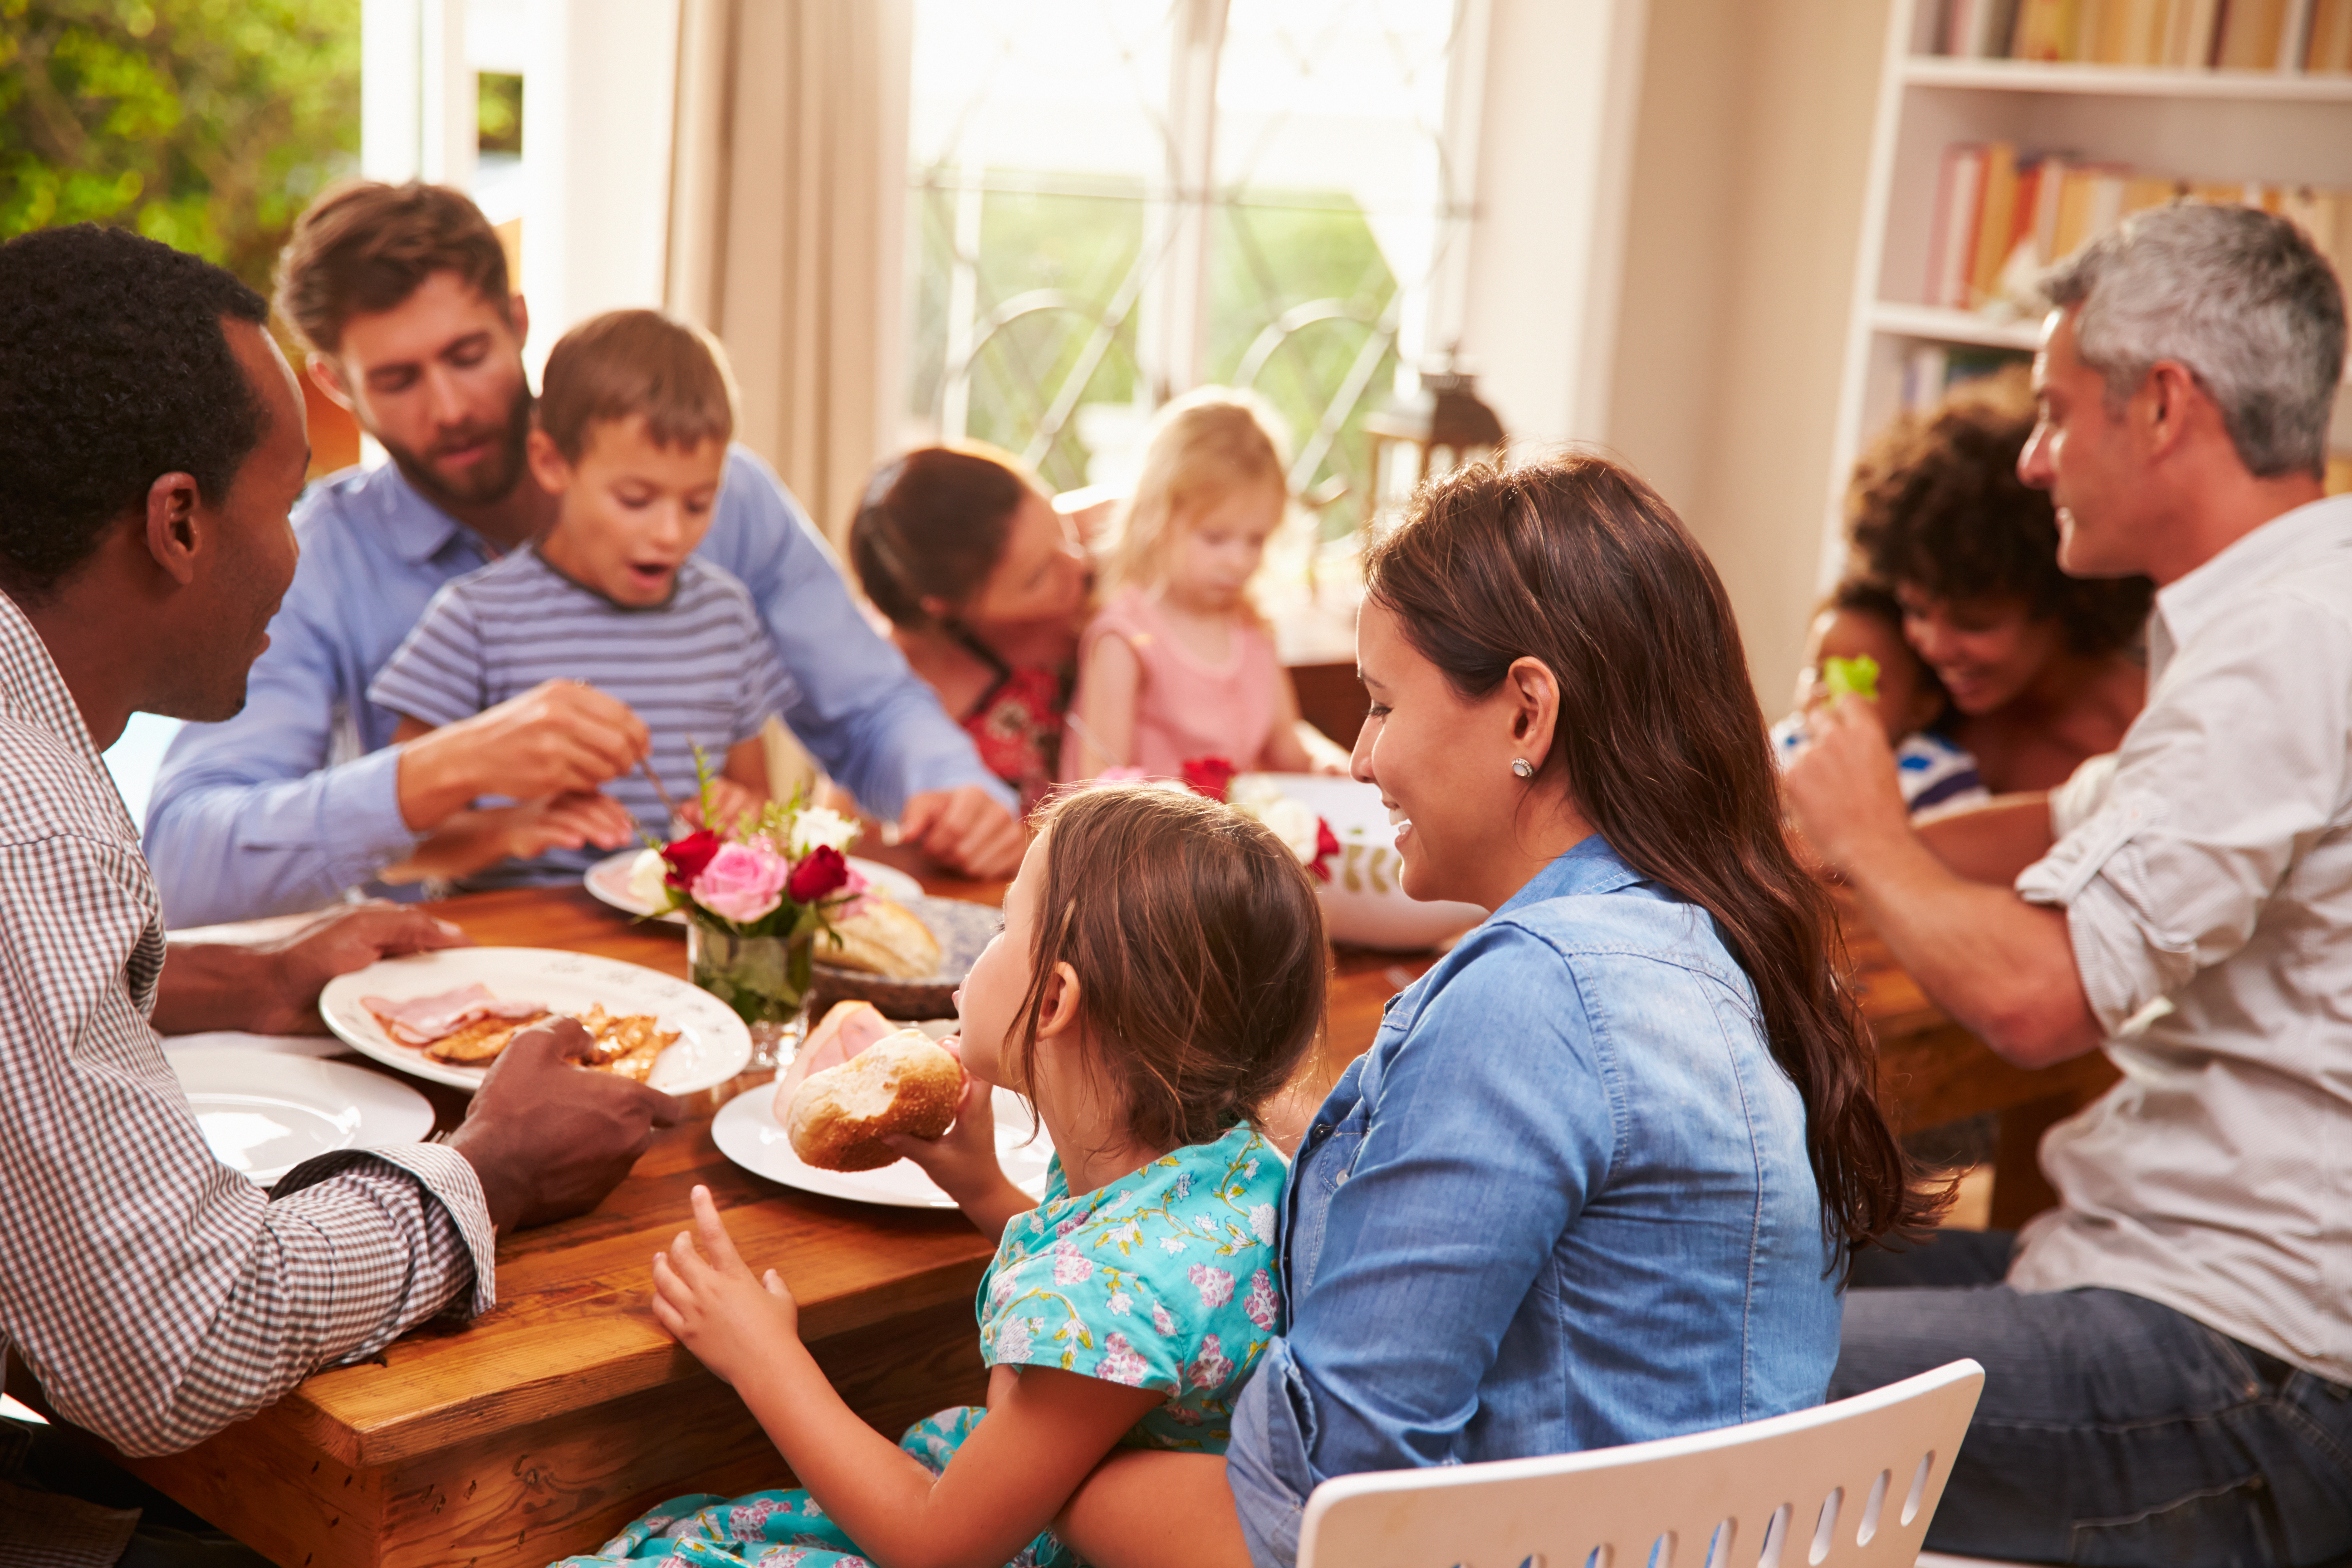 A family sitting at dinning table | Source: Shutterstock